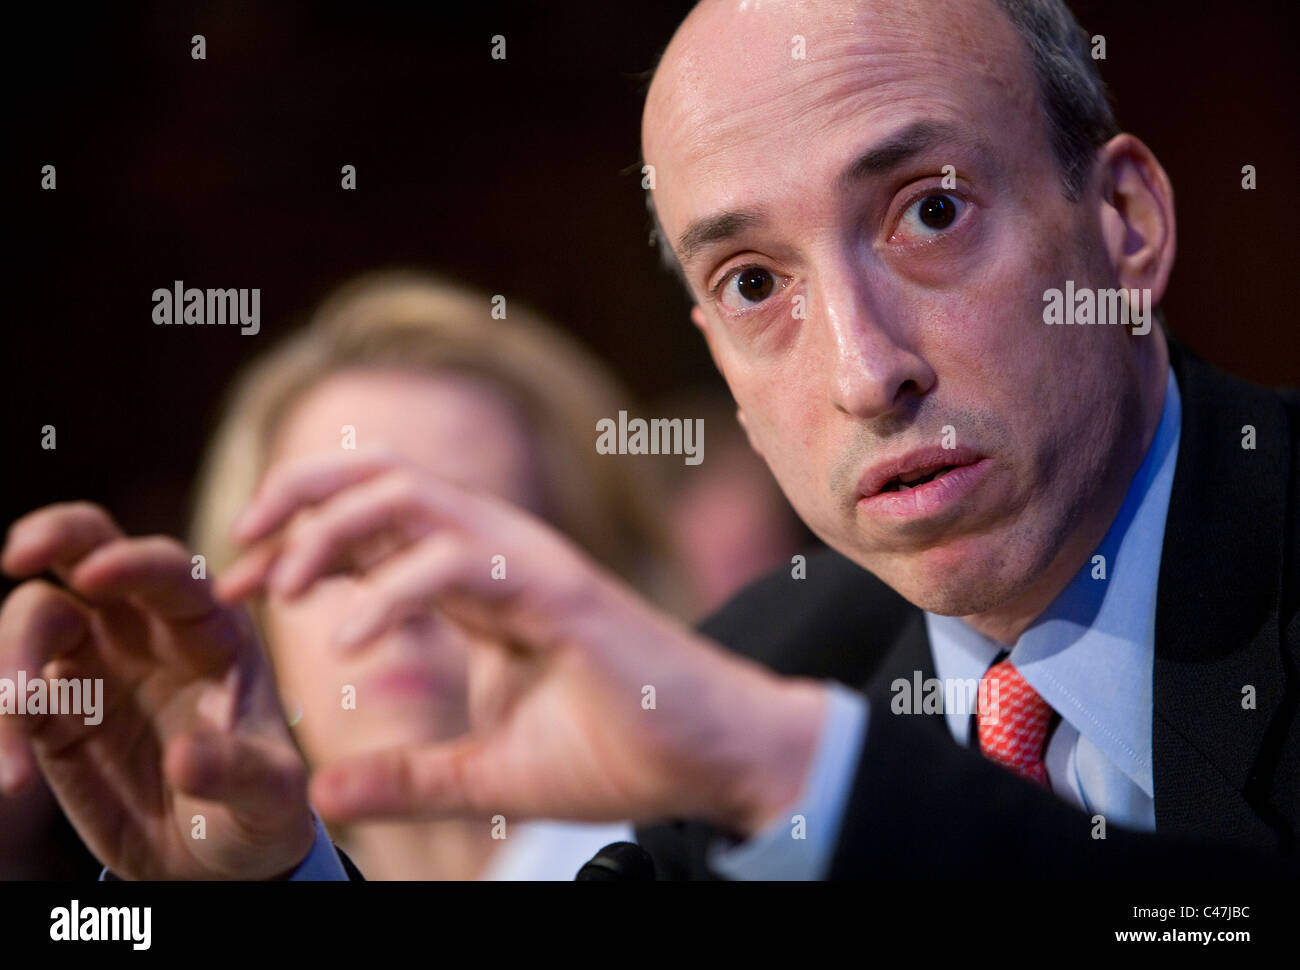 Commodity Futures Trading Commission Chairman Gary Gensler Stockfoto